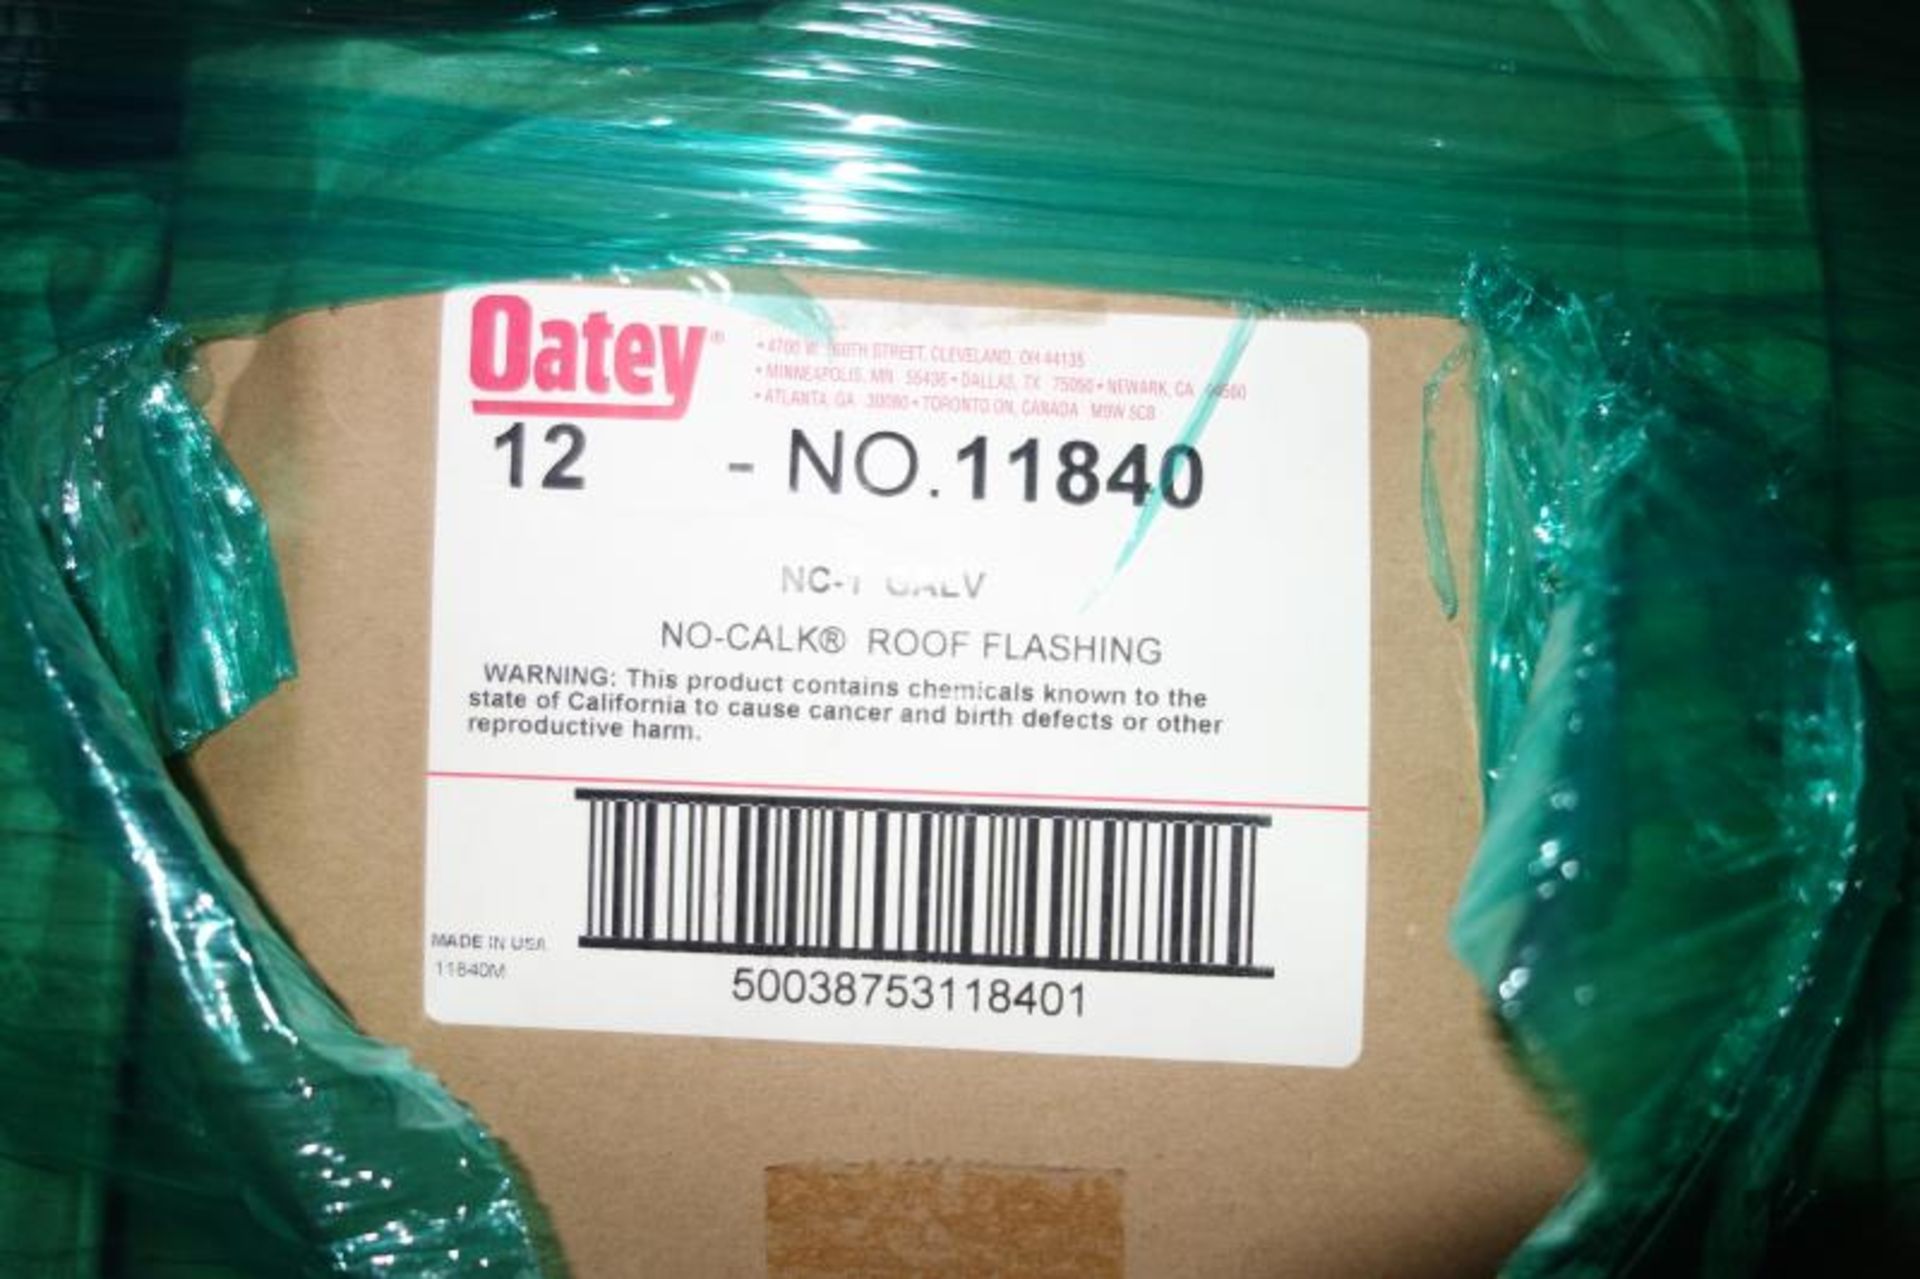 Pallet of Oatley 12 No11840 NC-1 Roof Flashing, (3) Boxes Powergrip Roof Mount System - Image 5 of 6